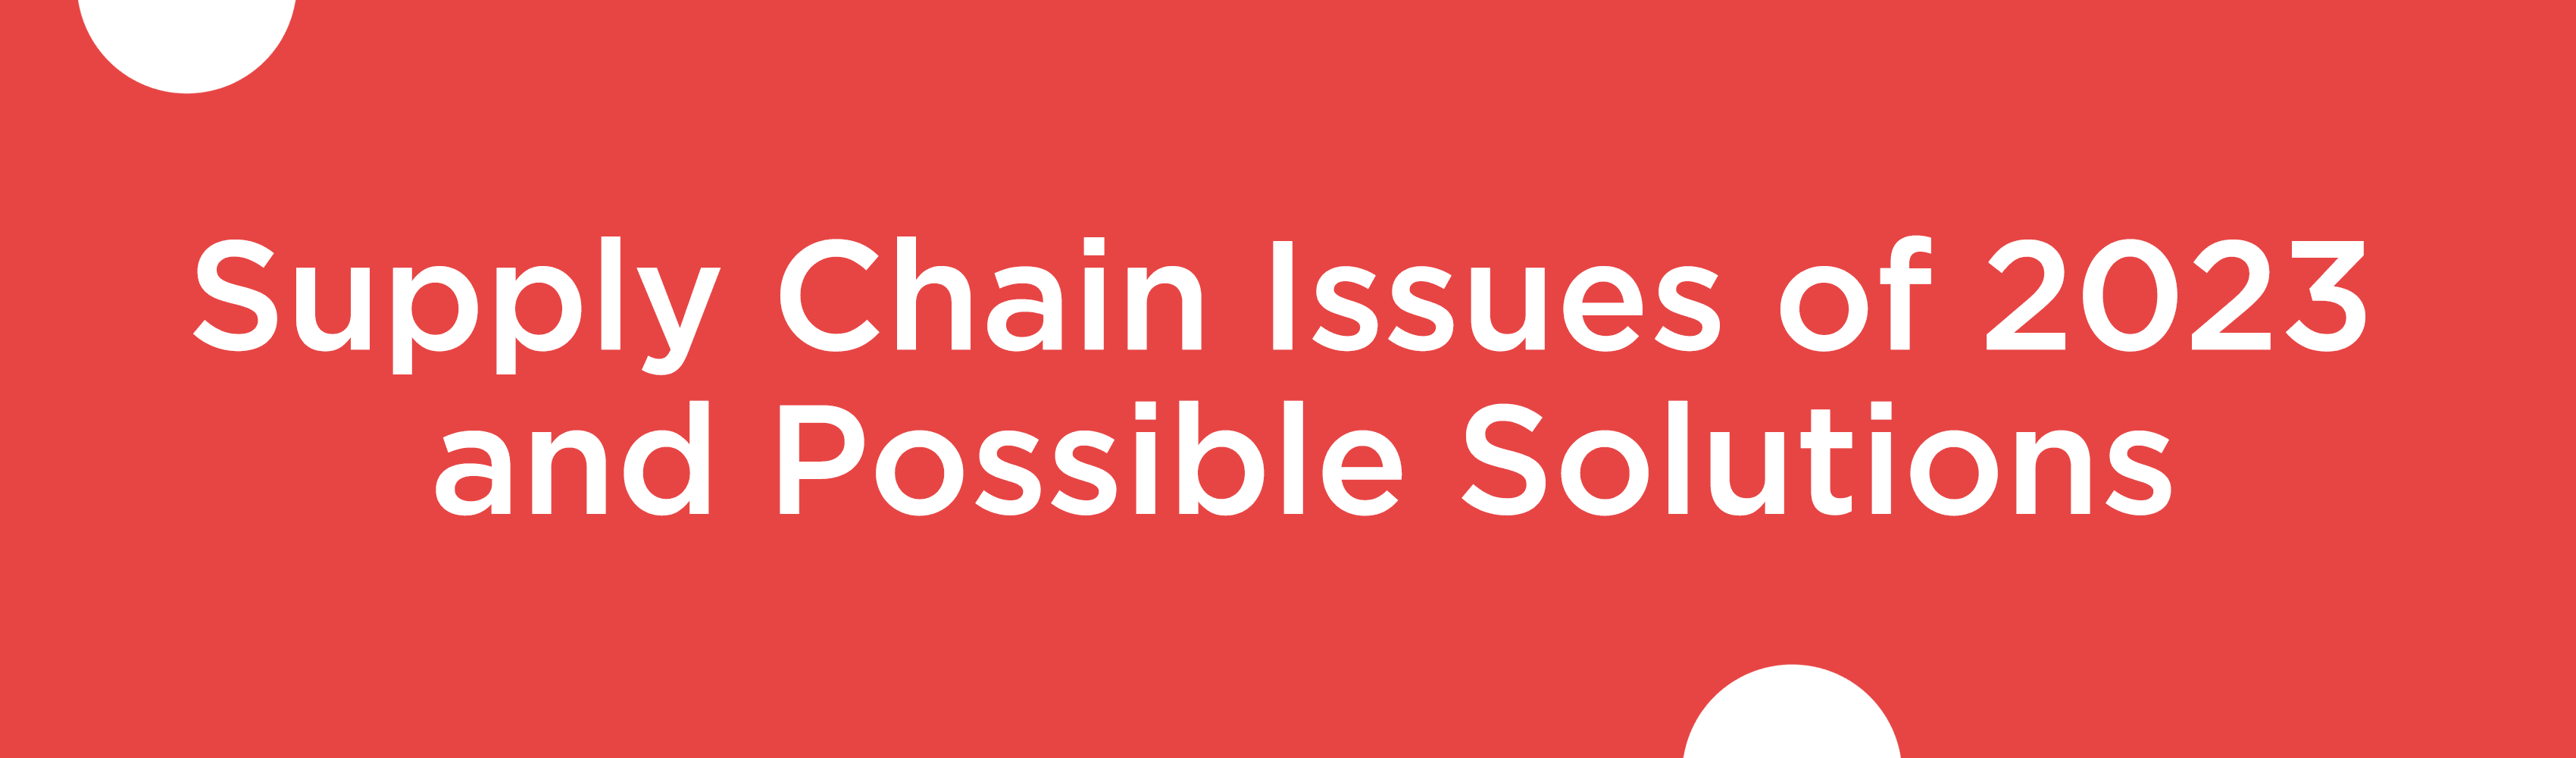 Supply Chain Issues of 2023 and Possible Solutions